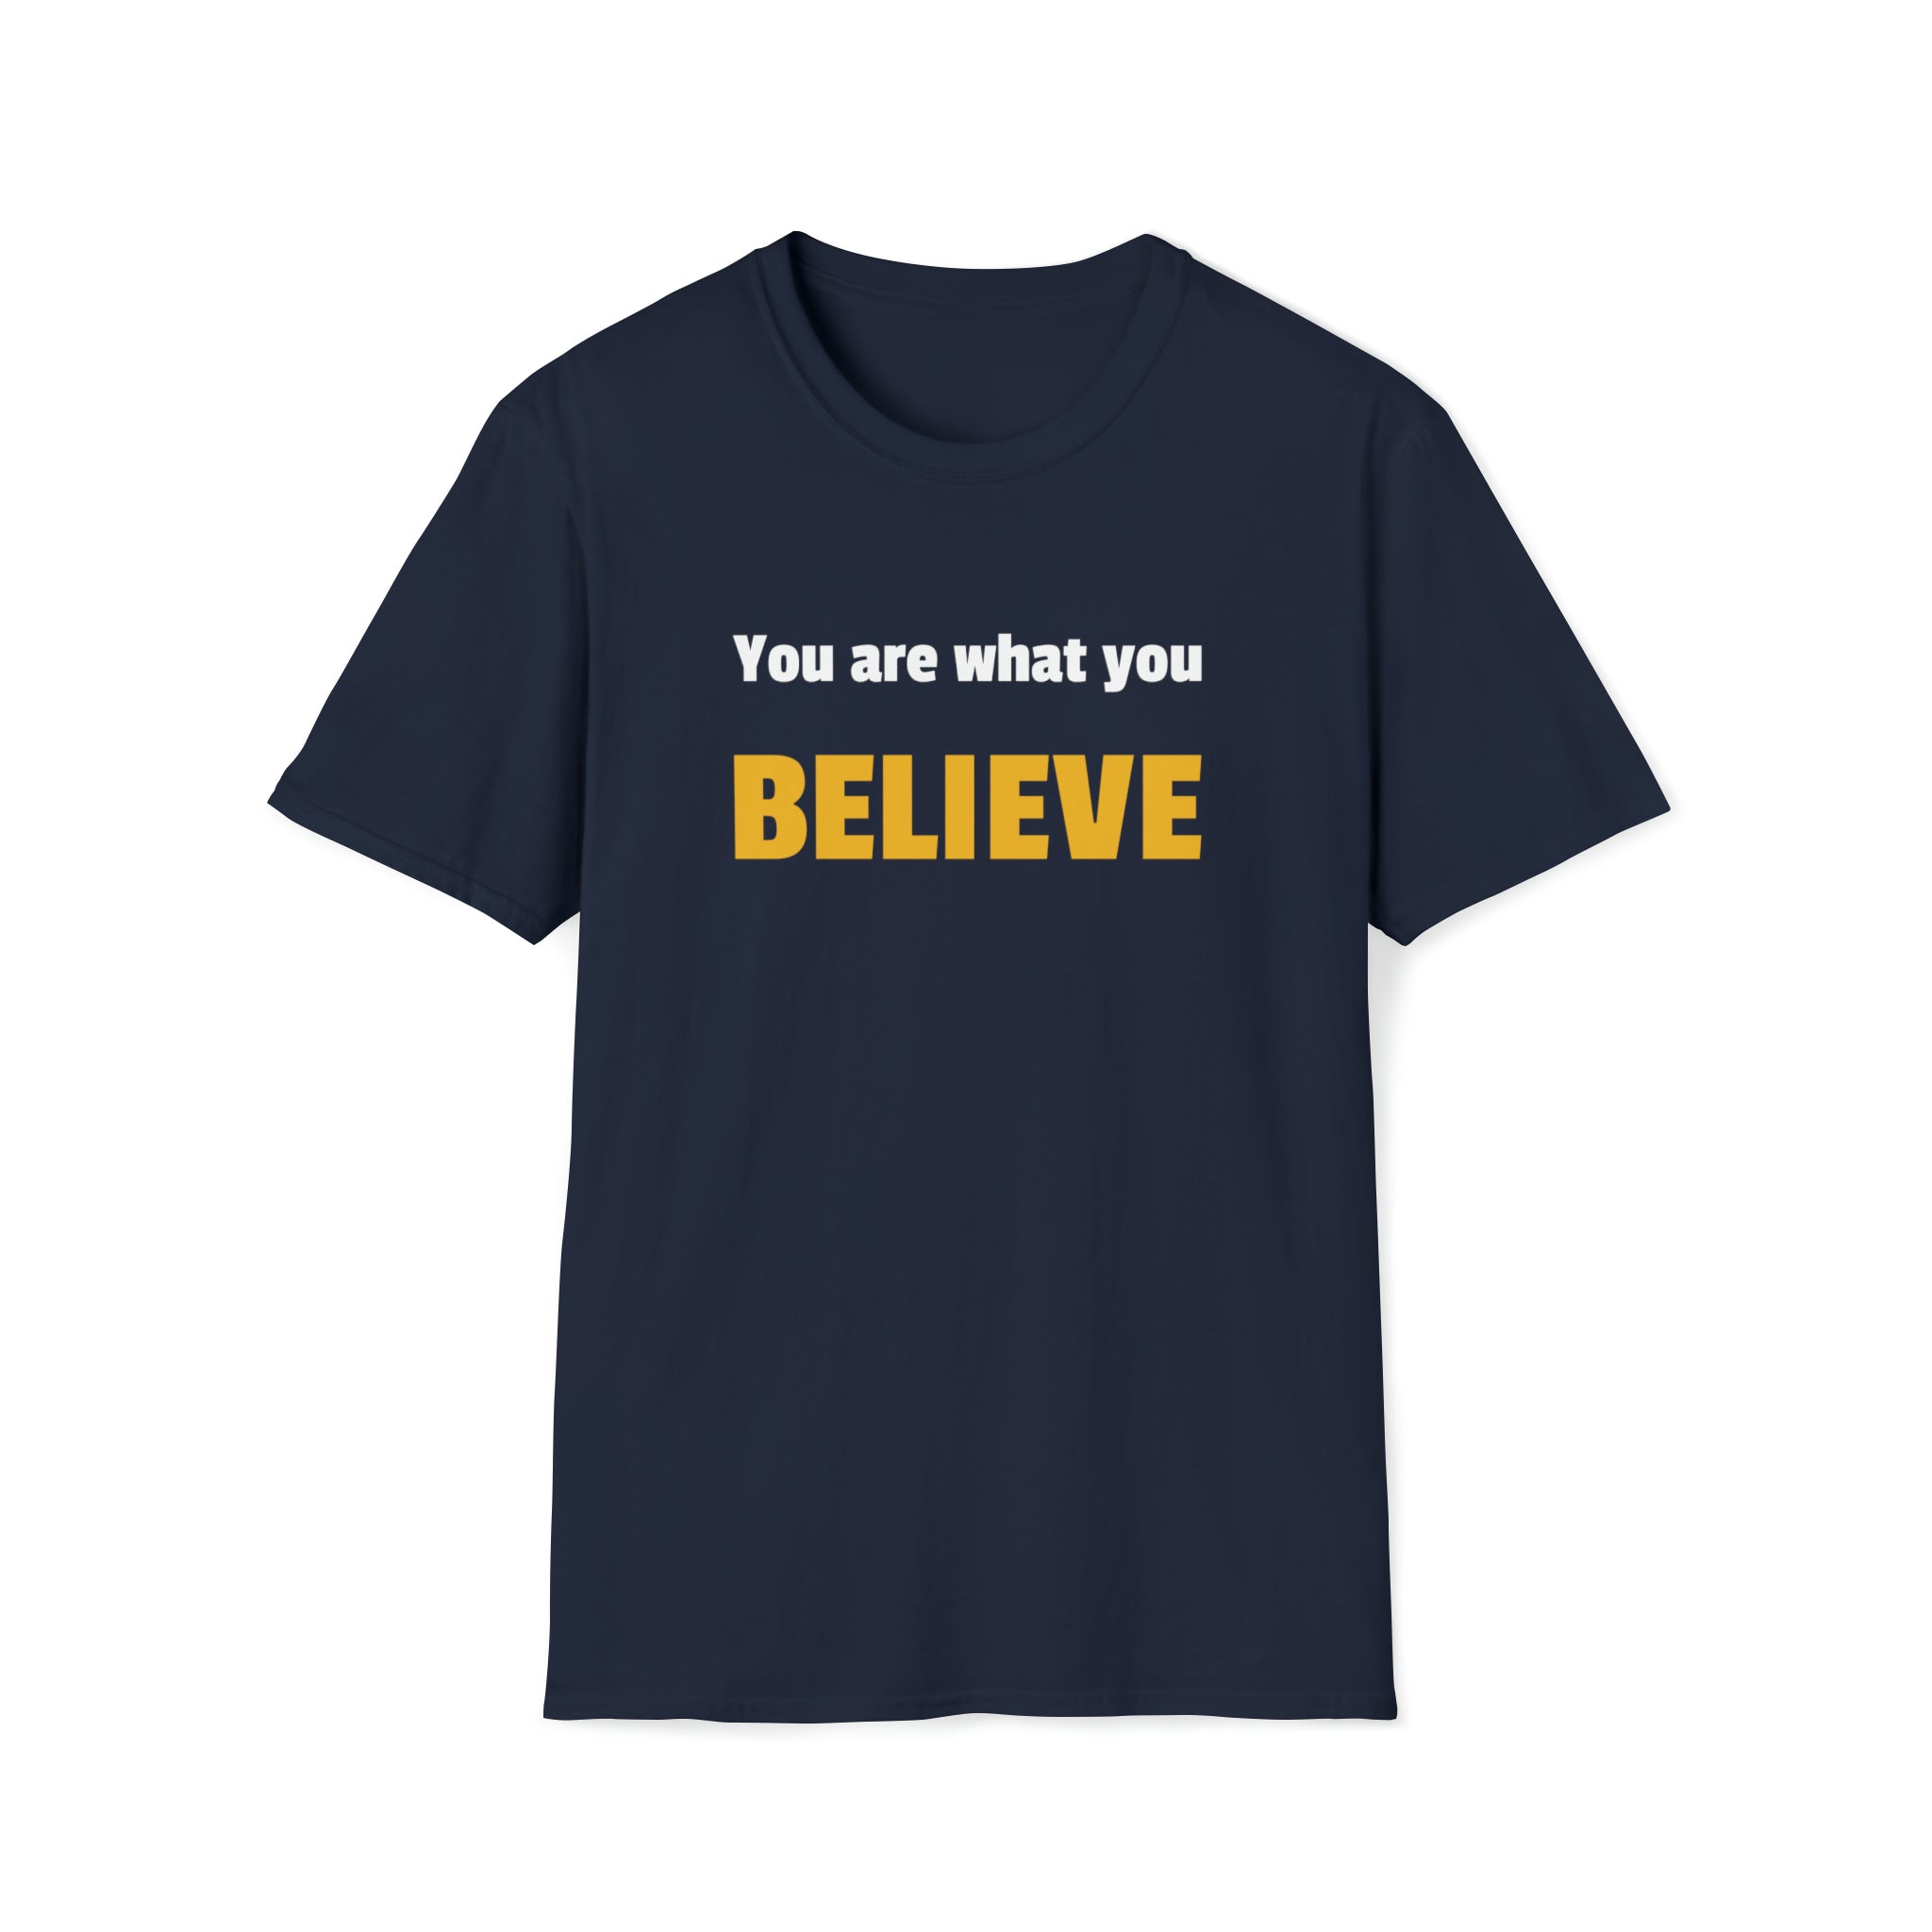 You are what you believe T-Shirt